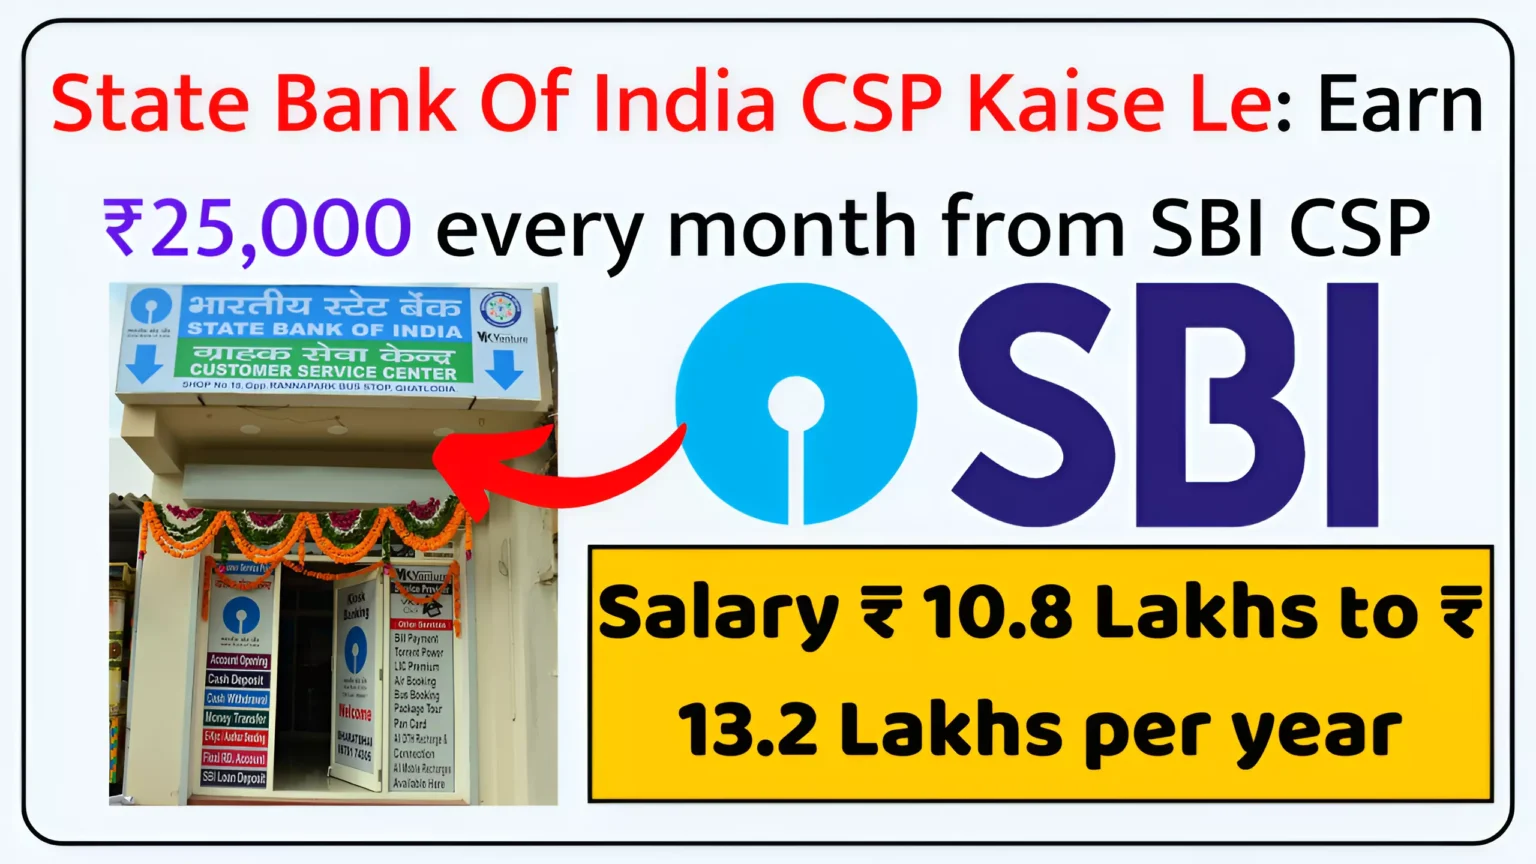 State Bank Of India CSP Kaise Le